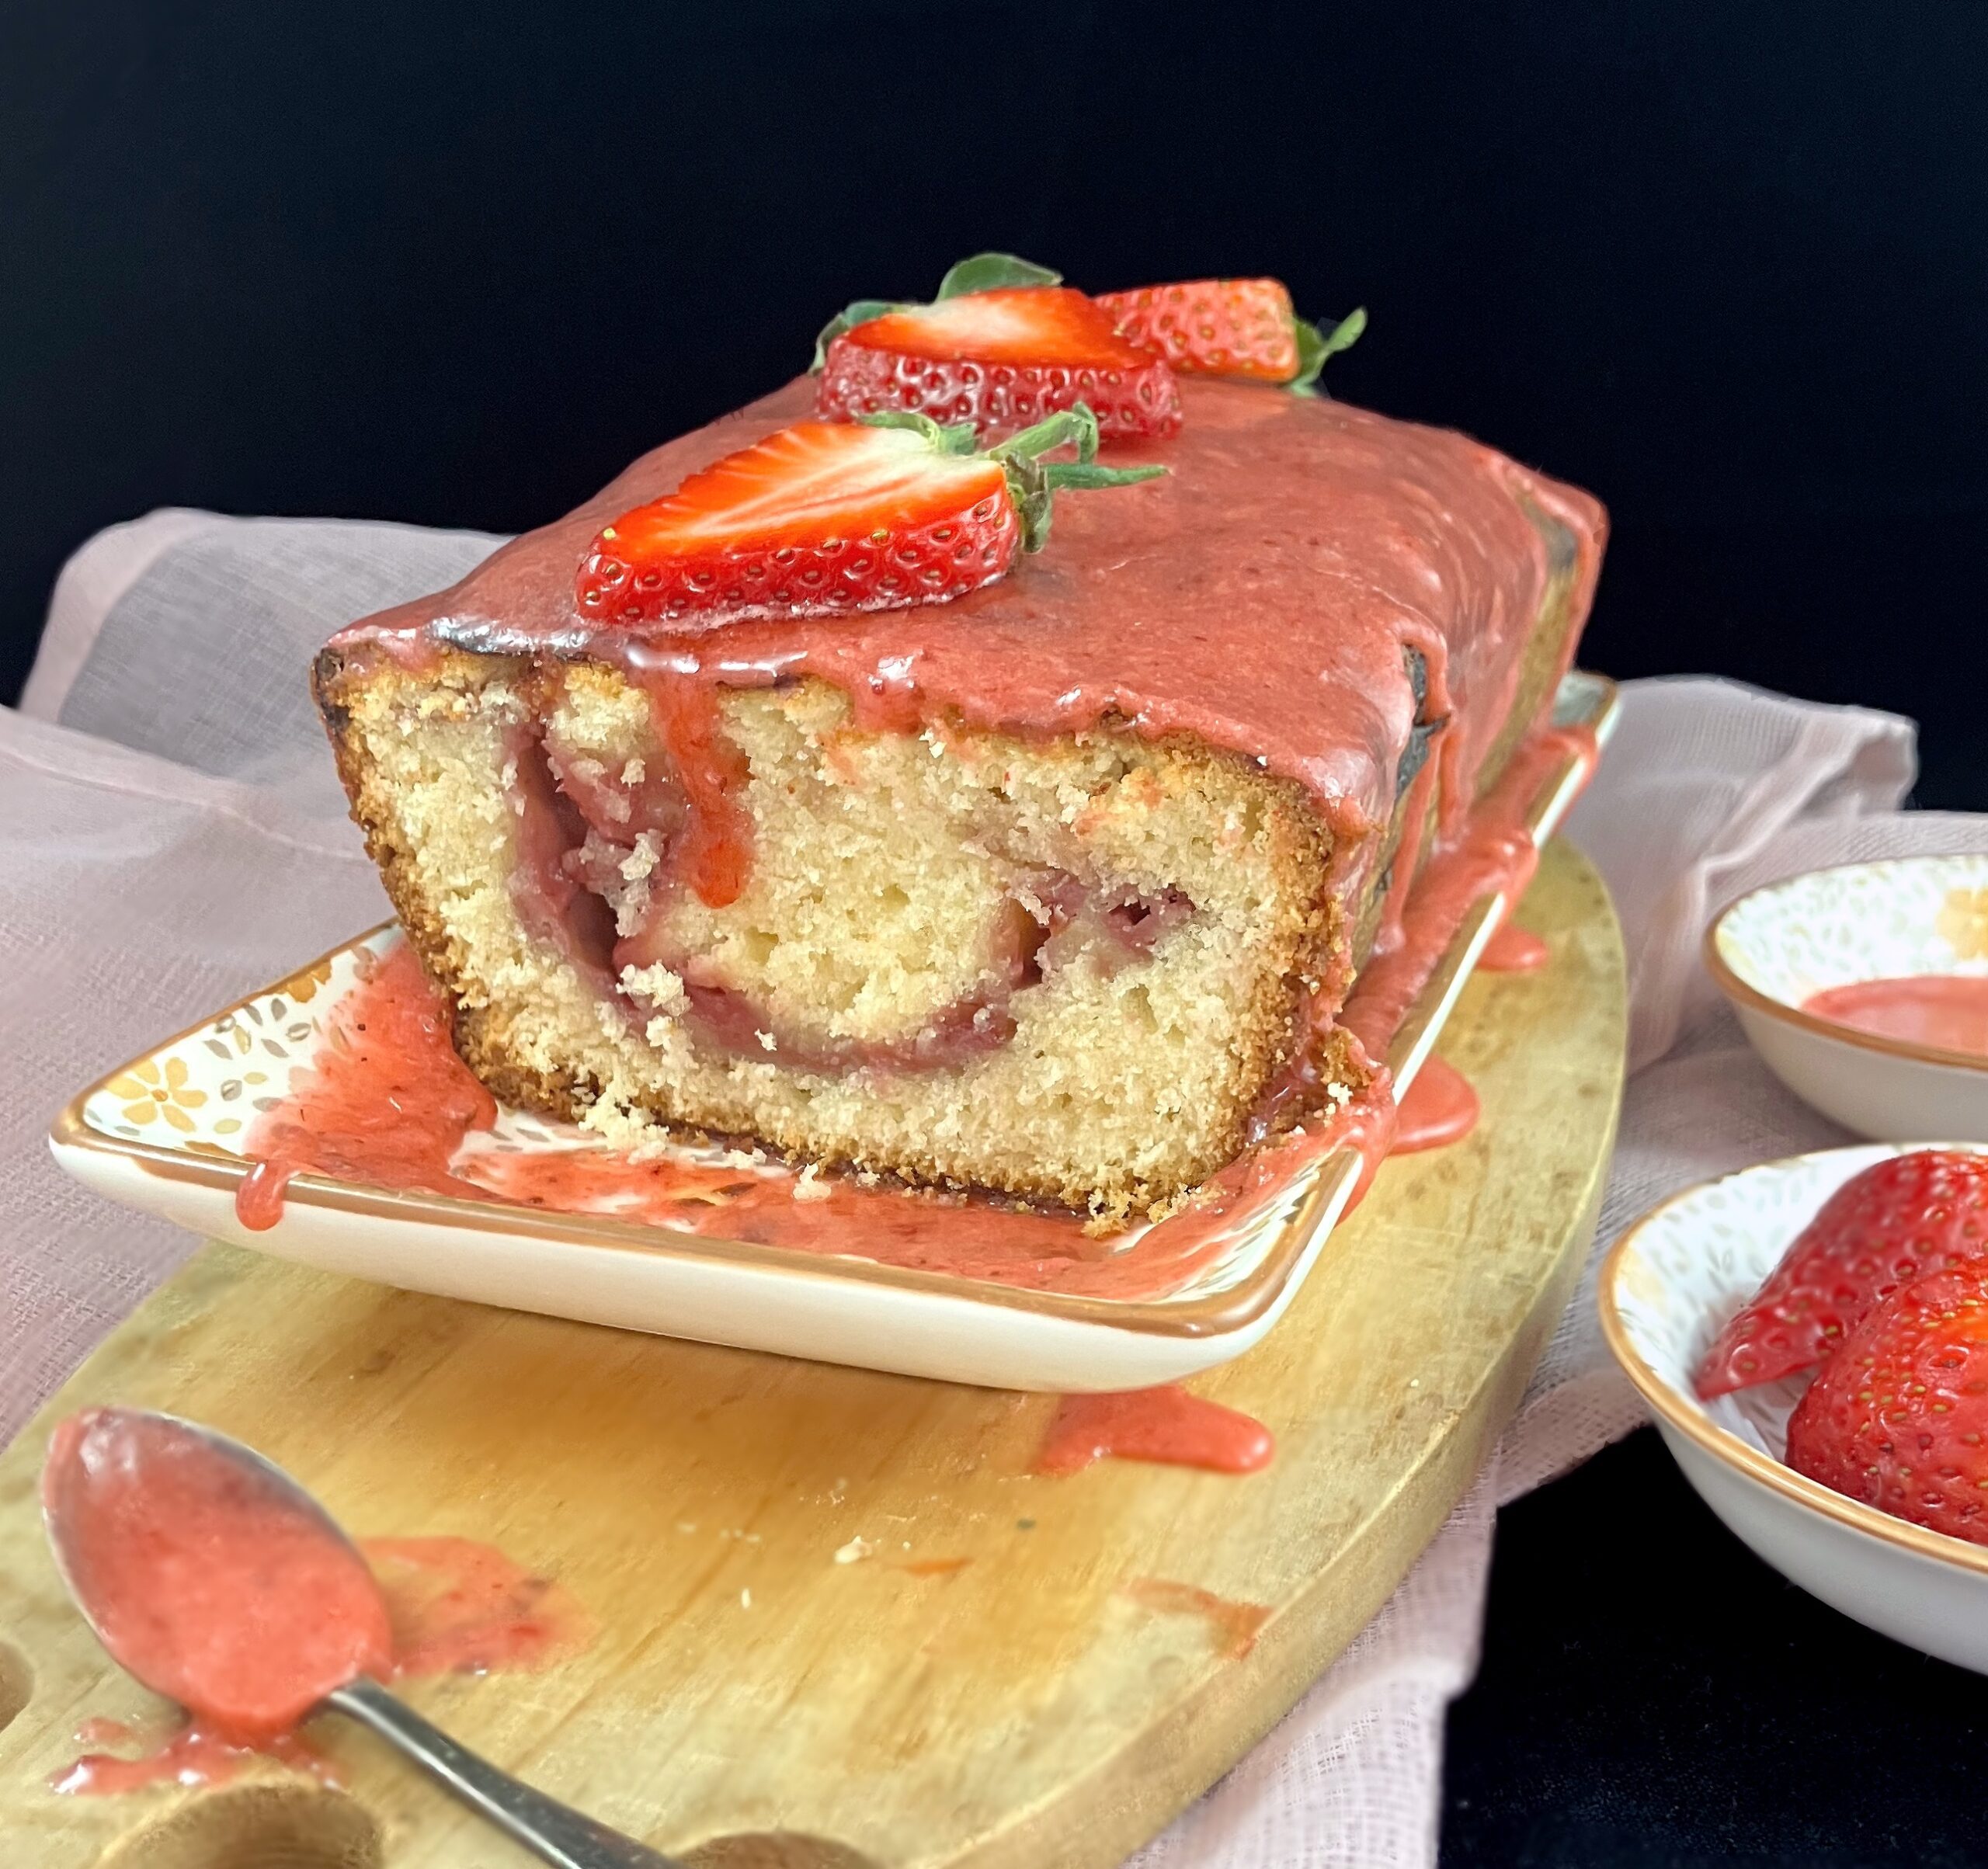 Strawberry Swirl Bundt Cake with Vanilla Icing - Bakers Table